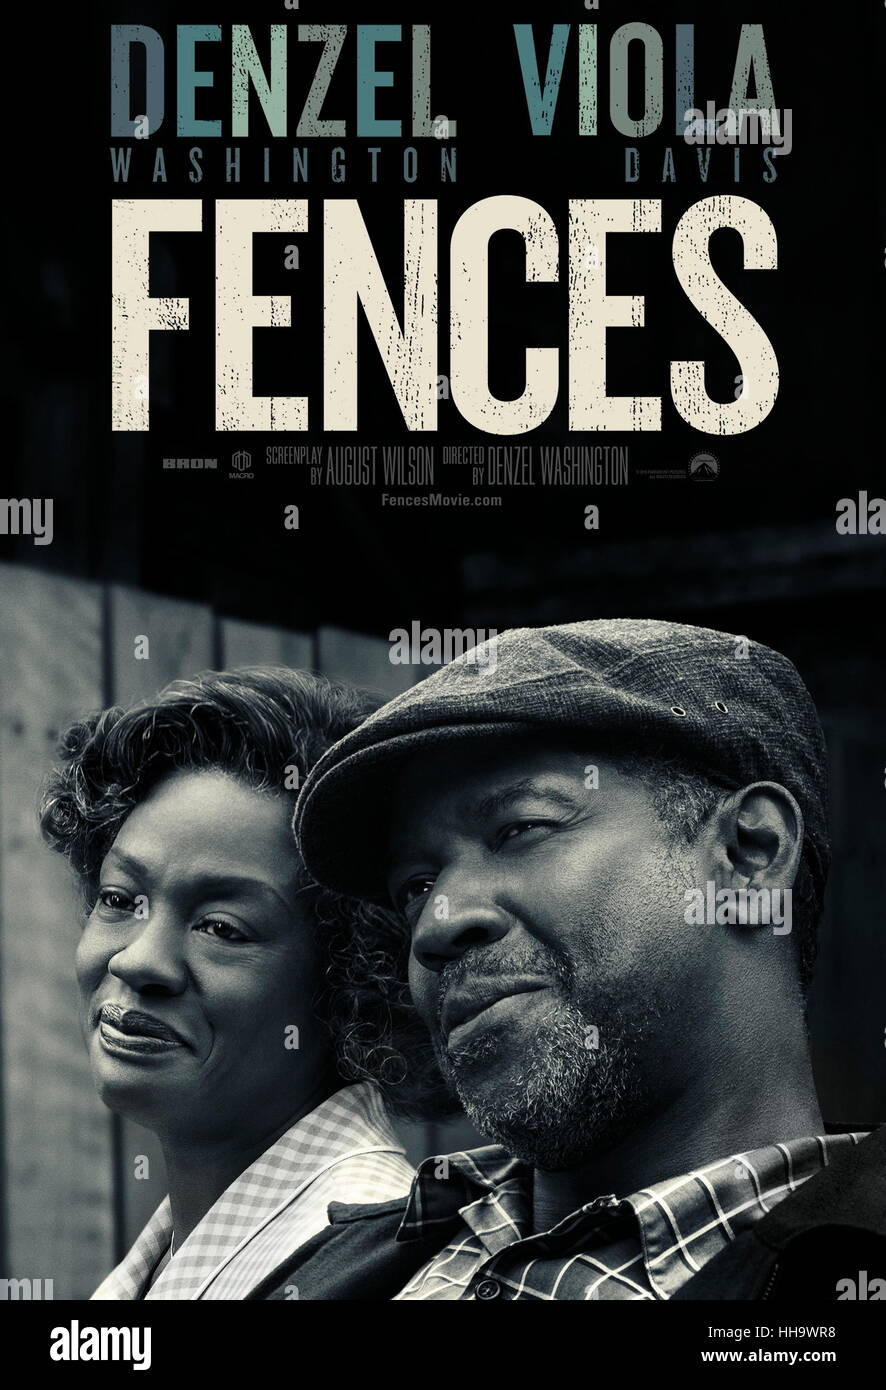 RELEASE DATE: December 25, 2016 TITLE: Fences STUDIO: Paramount Pictures DIRECTOR: Denzel Washington PLOT: An African American father struggles with race relations in the United States while trying to raise his family in the 1950s and coming to terms with the events of his life STARRING: Denzel Washington as Troy, Viola Davis as Rose poster art (Credit: © Paramount Pictures/Entertainment Pictures) Stock Photo